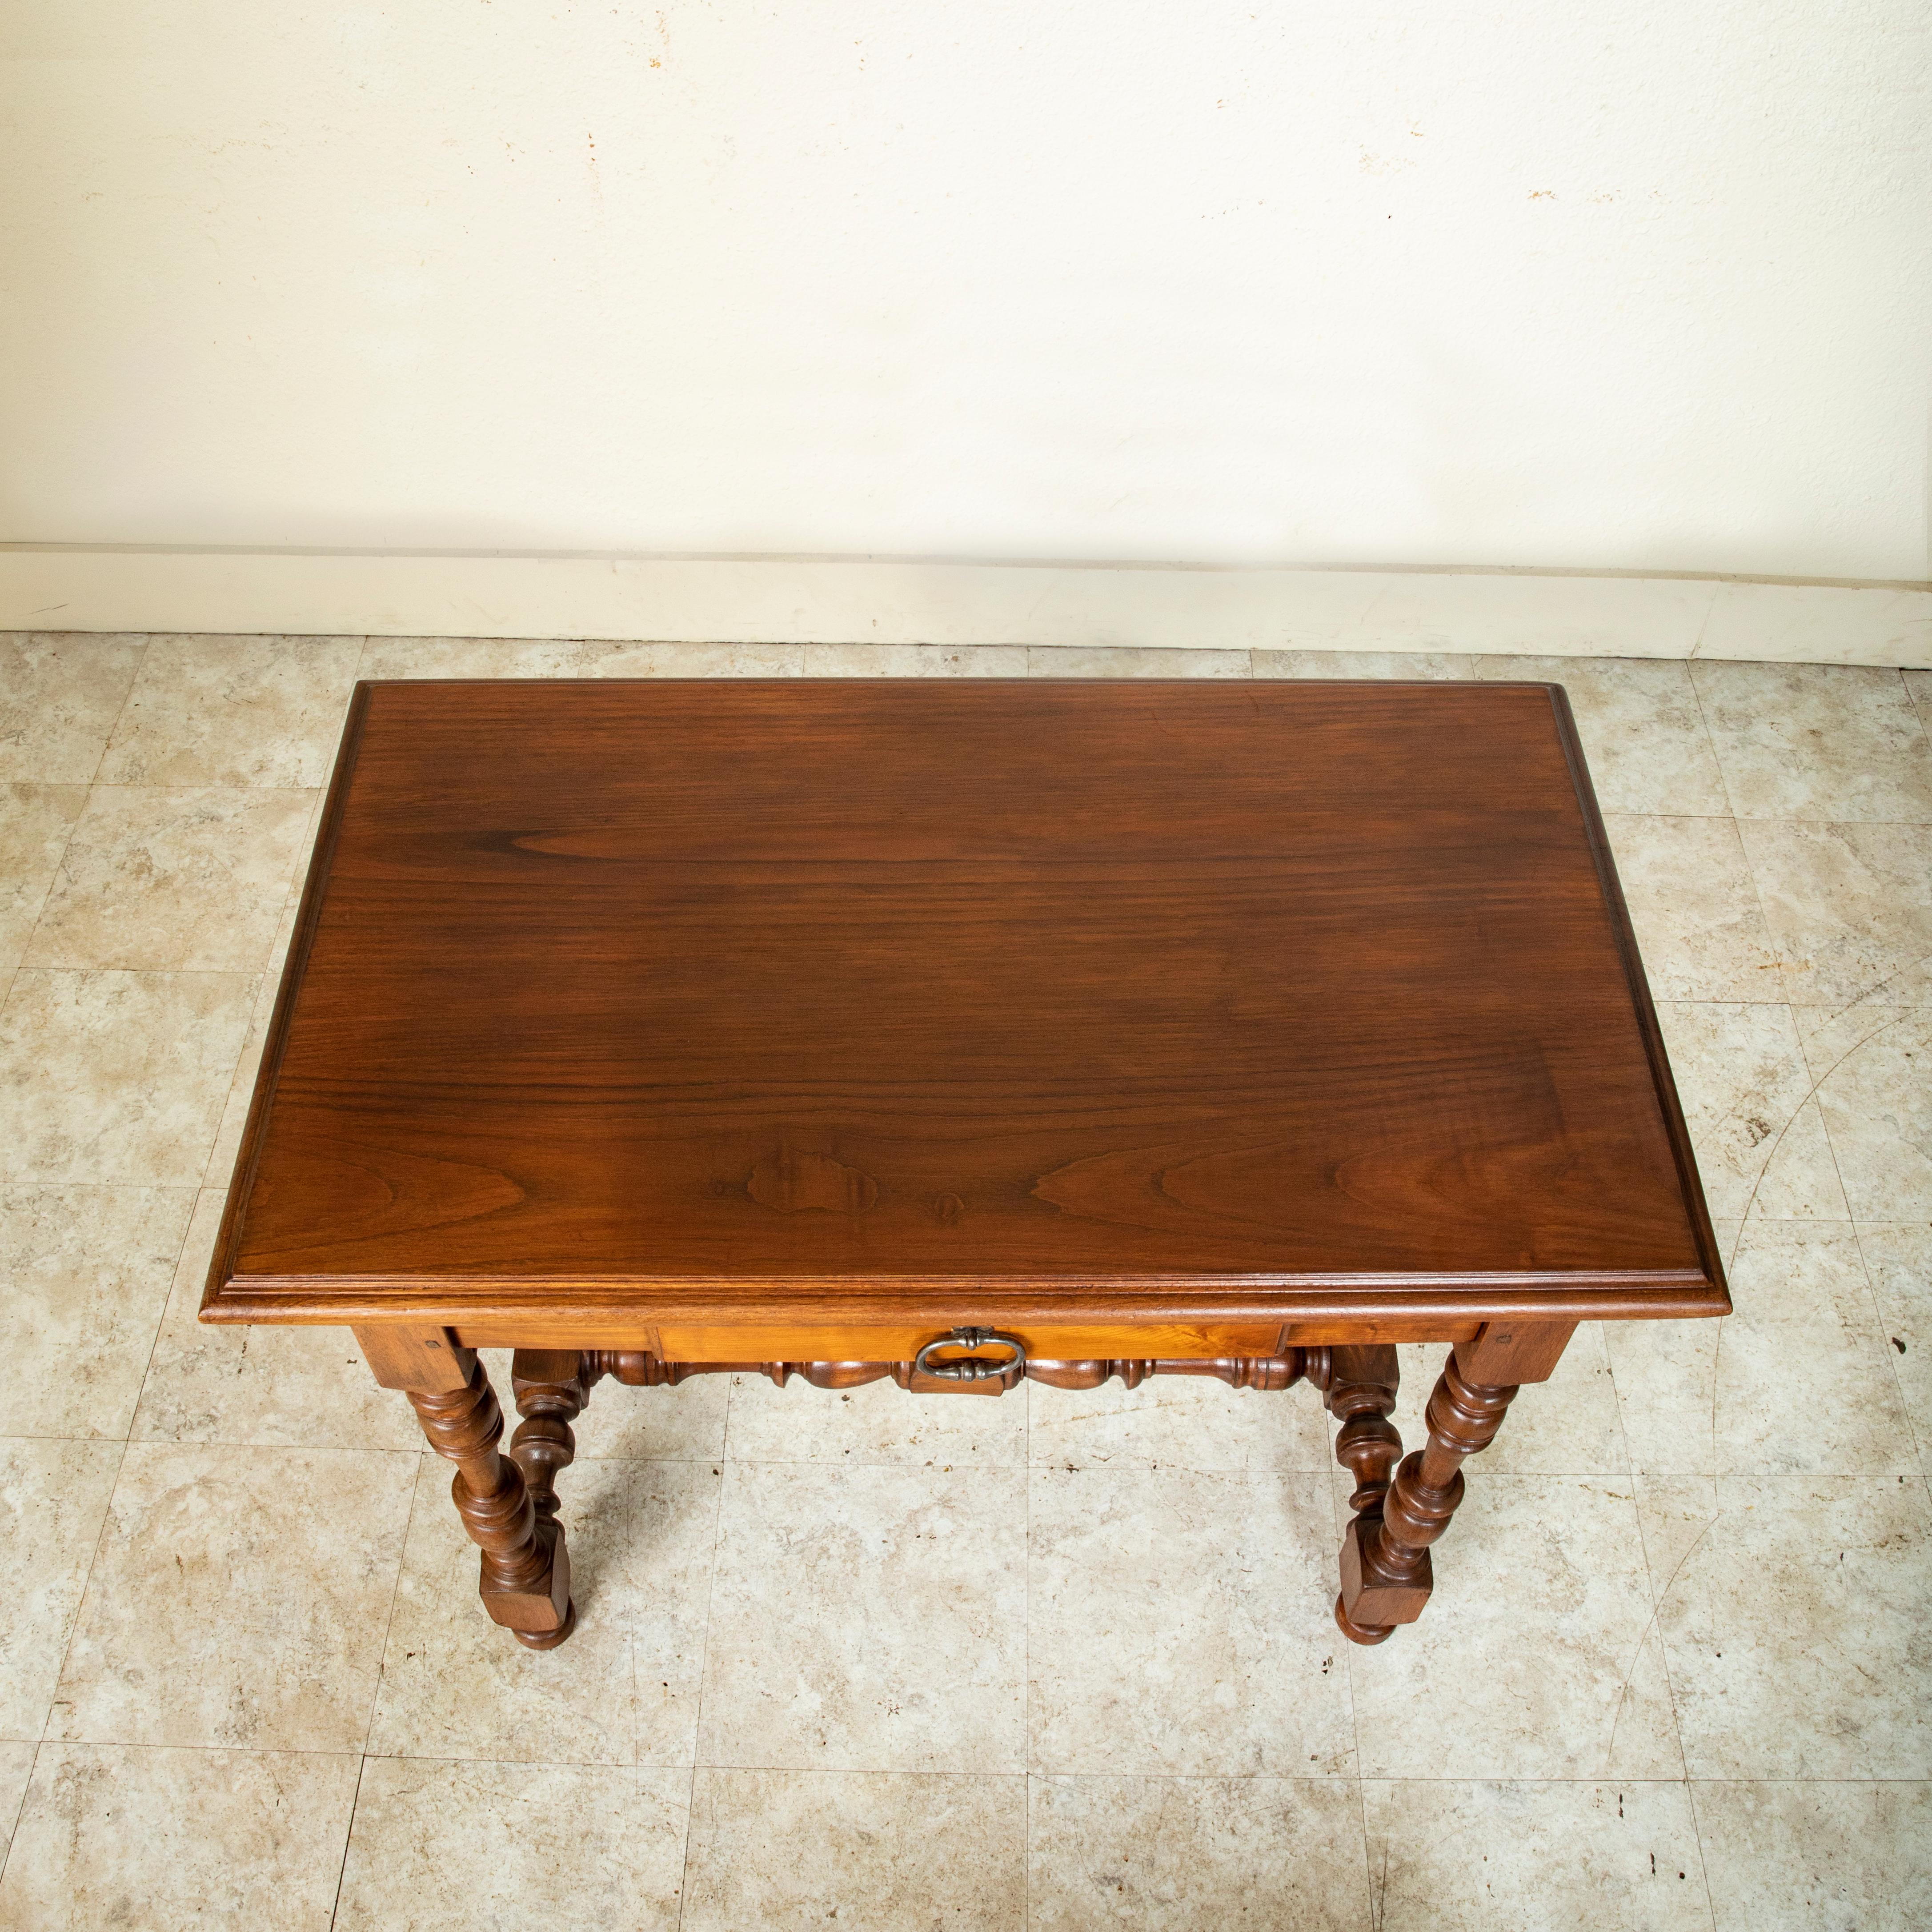 Late 19th Century French Henri II Style Walnut Writing Table or Desk with Drawer For Sale 3